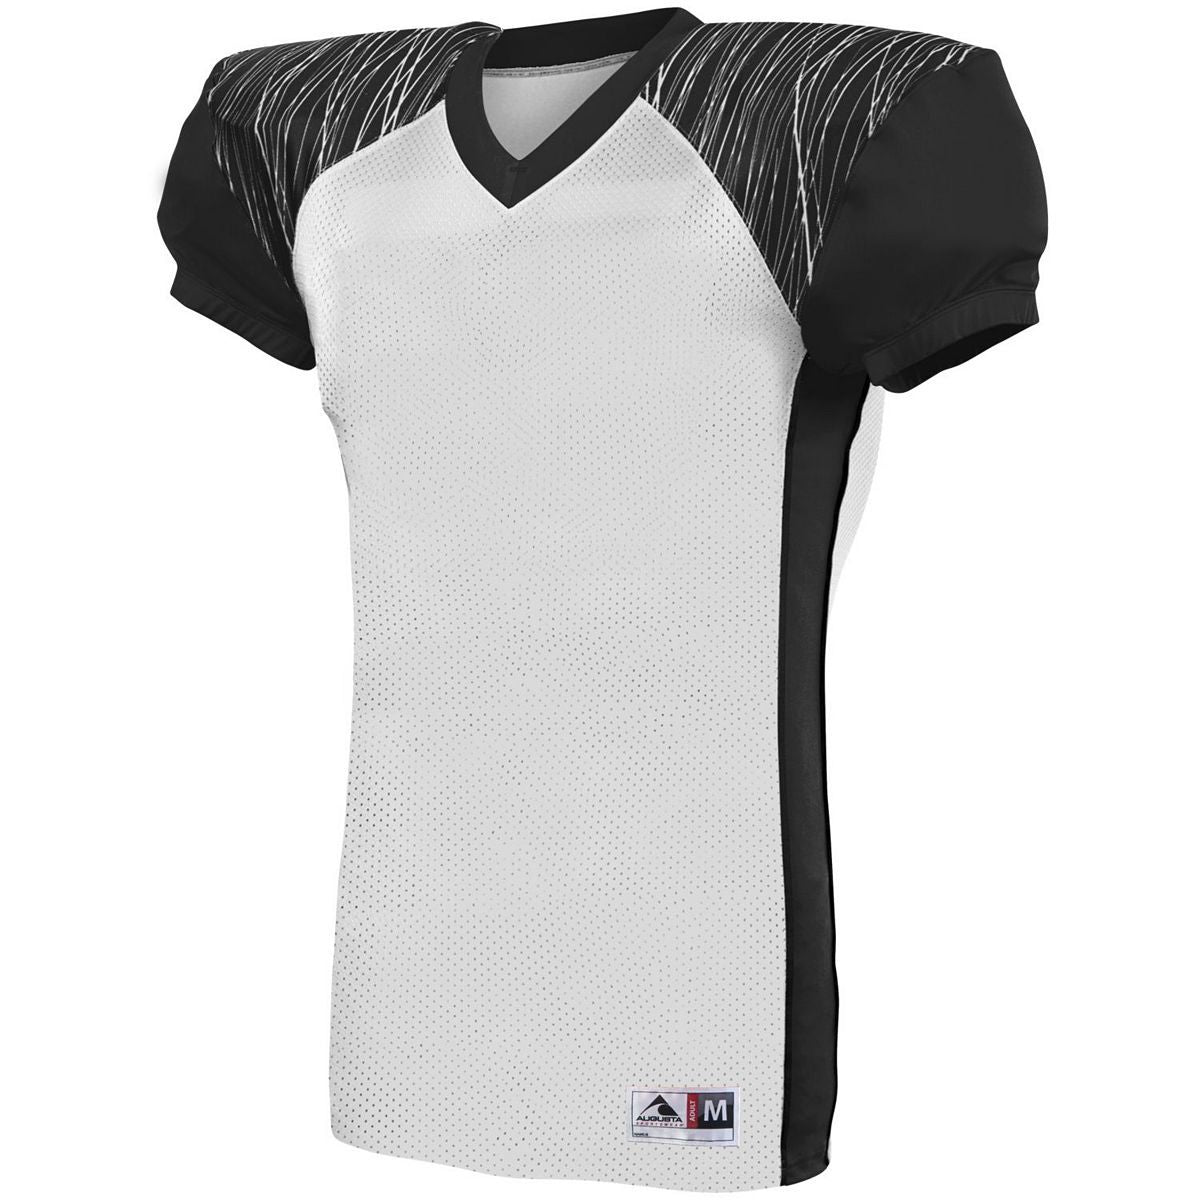 Augusta Sportswear Zone Play Jersey in White/Black/Graphite Print  -Part of the Adult, Adult-Jersey, Augusta-Products, Football, Shirts, All-Sports, All-Sports-1 product lines at KanaleyCreations.com